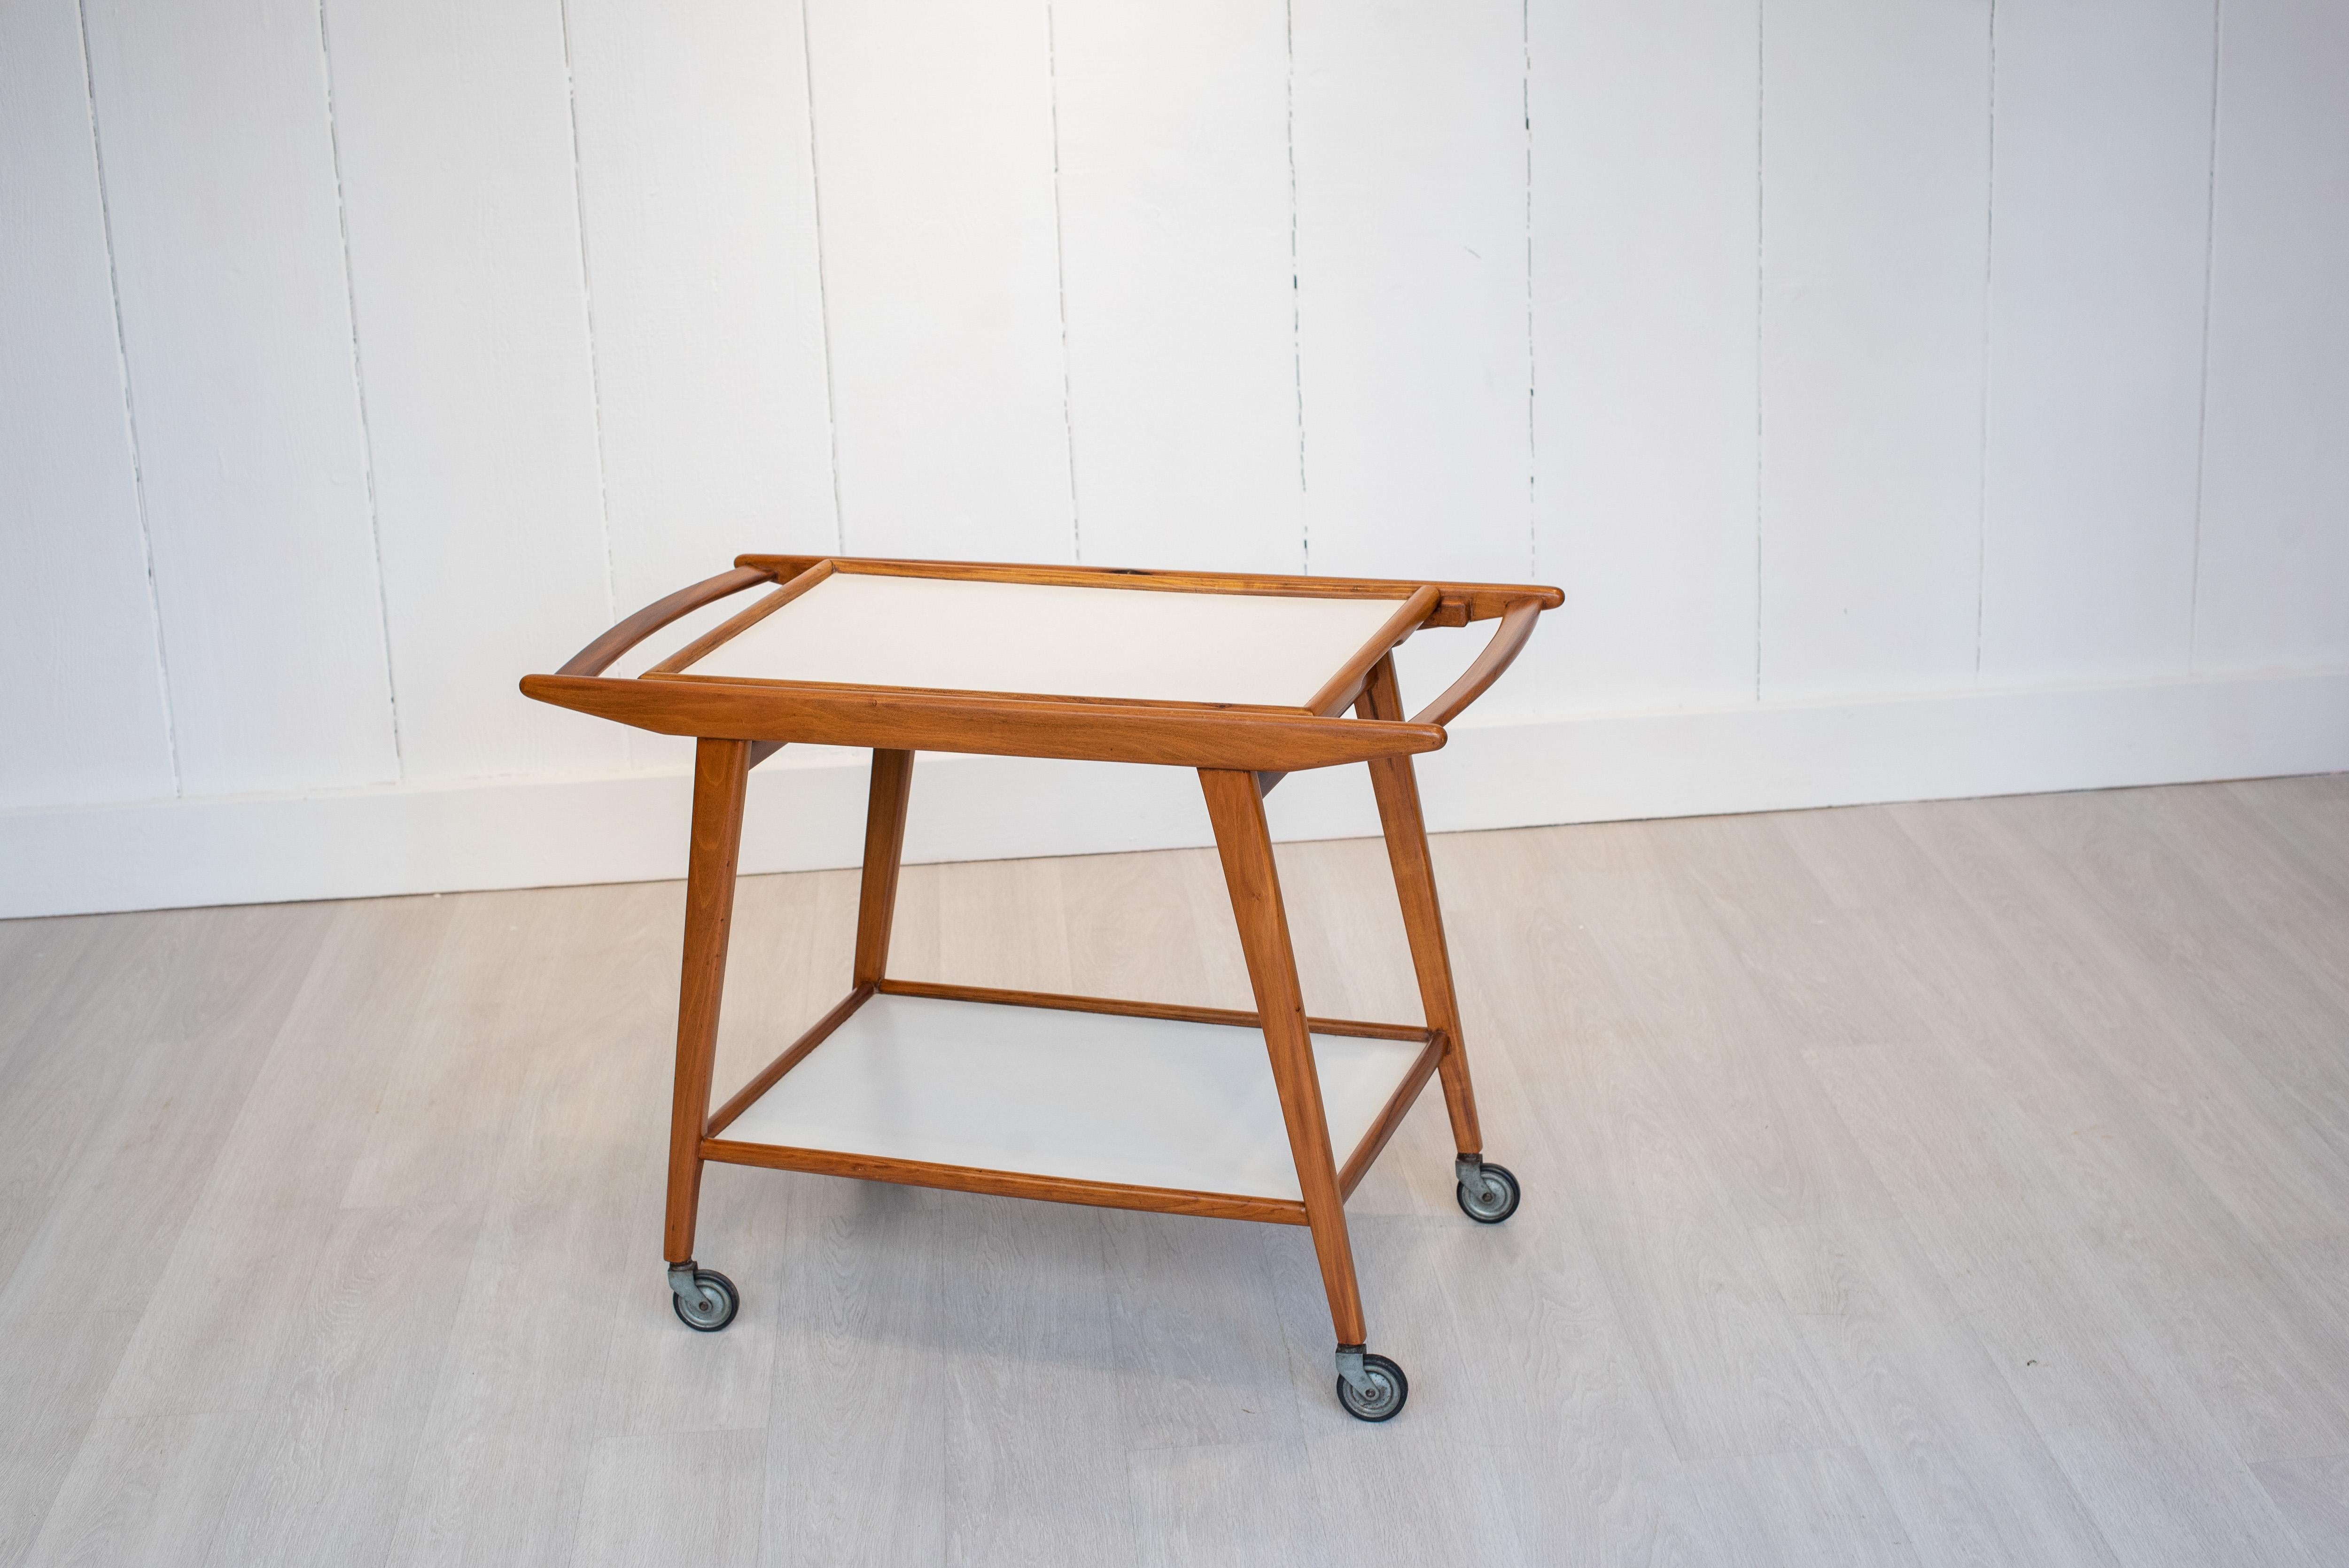 Made in the 1960s by Geraldo de Barros, this tea trolley of solid caviuna is a landmark piece of Brazilian design. The pure, fine and slightly curved lines give it a sensuality. Its white melamine trays are in perfect harmony with the wood, creating